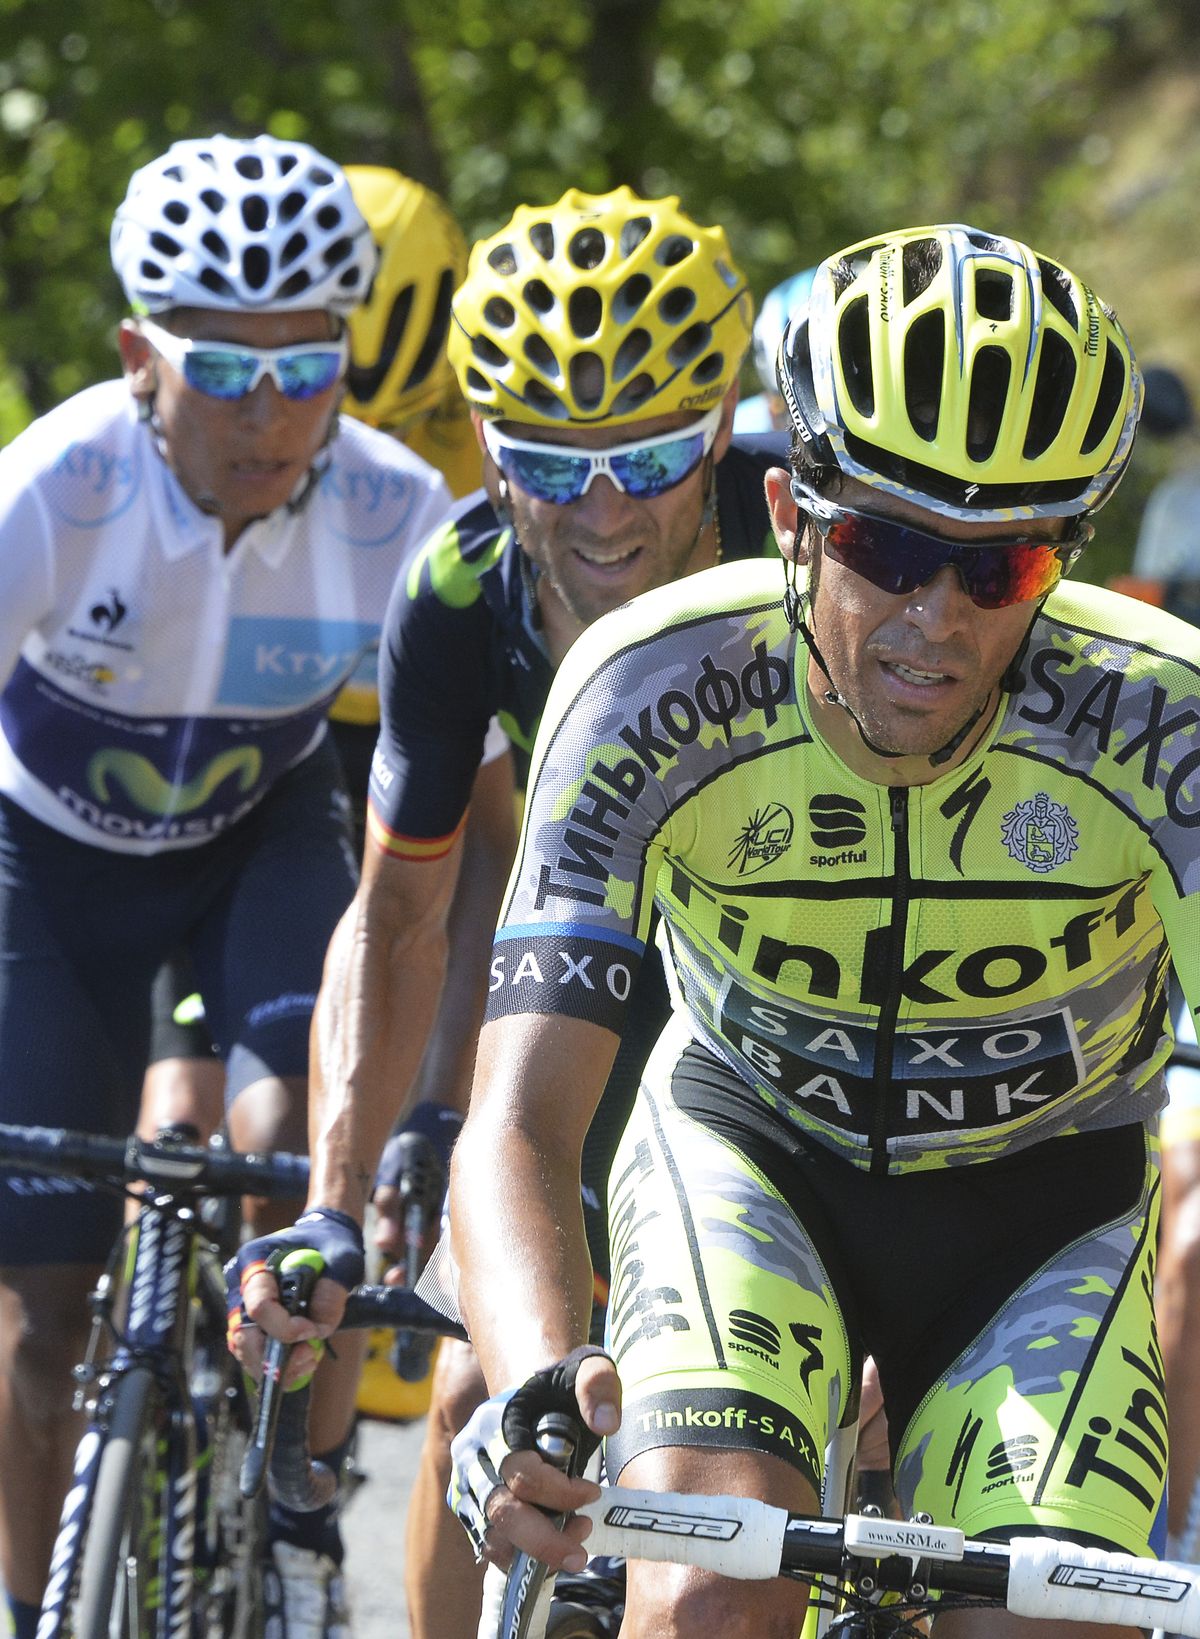 Nairo Quintana, left, is in second place and trails Chris Froome by 3 minutes. (Associated Press)